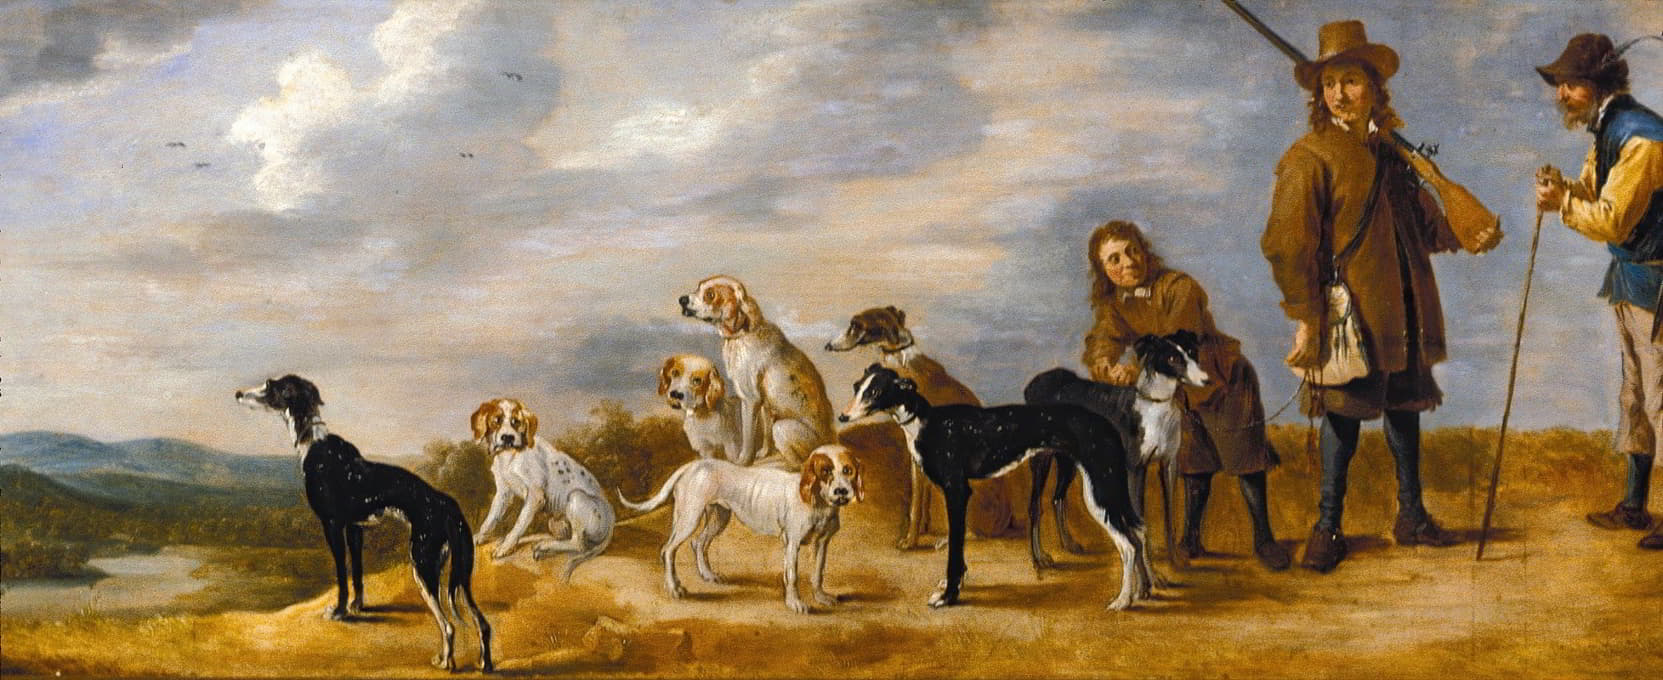 workshop of David Teniers the Younger - A Hunter with Eight Hounds